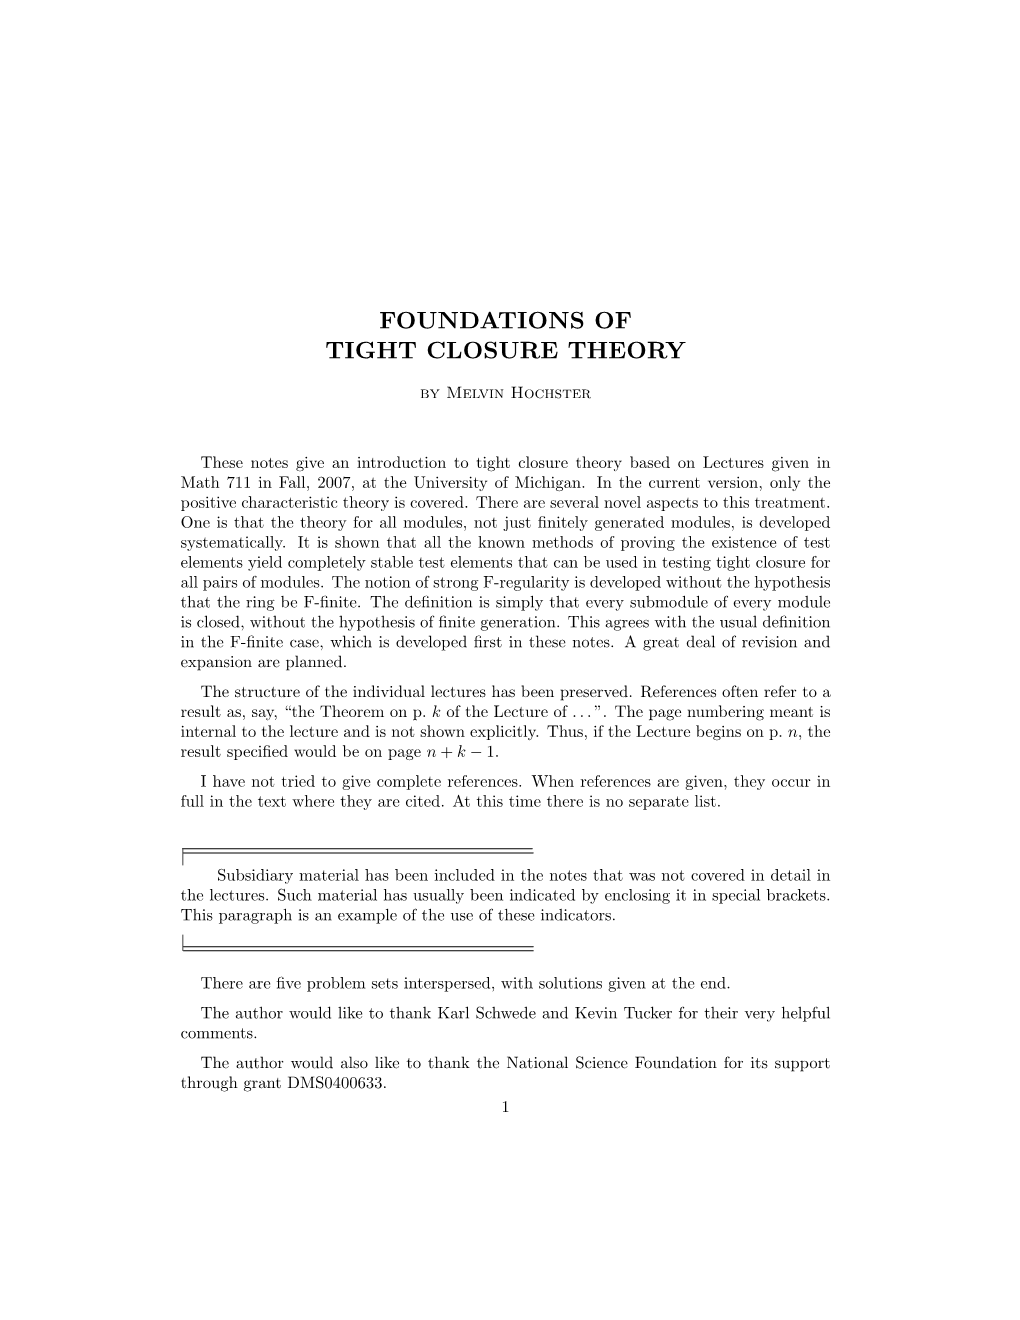 Foundations of Tight Closure Theory